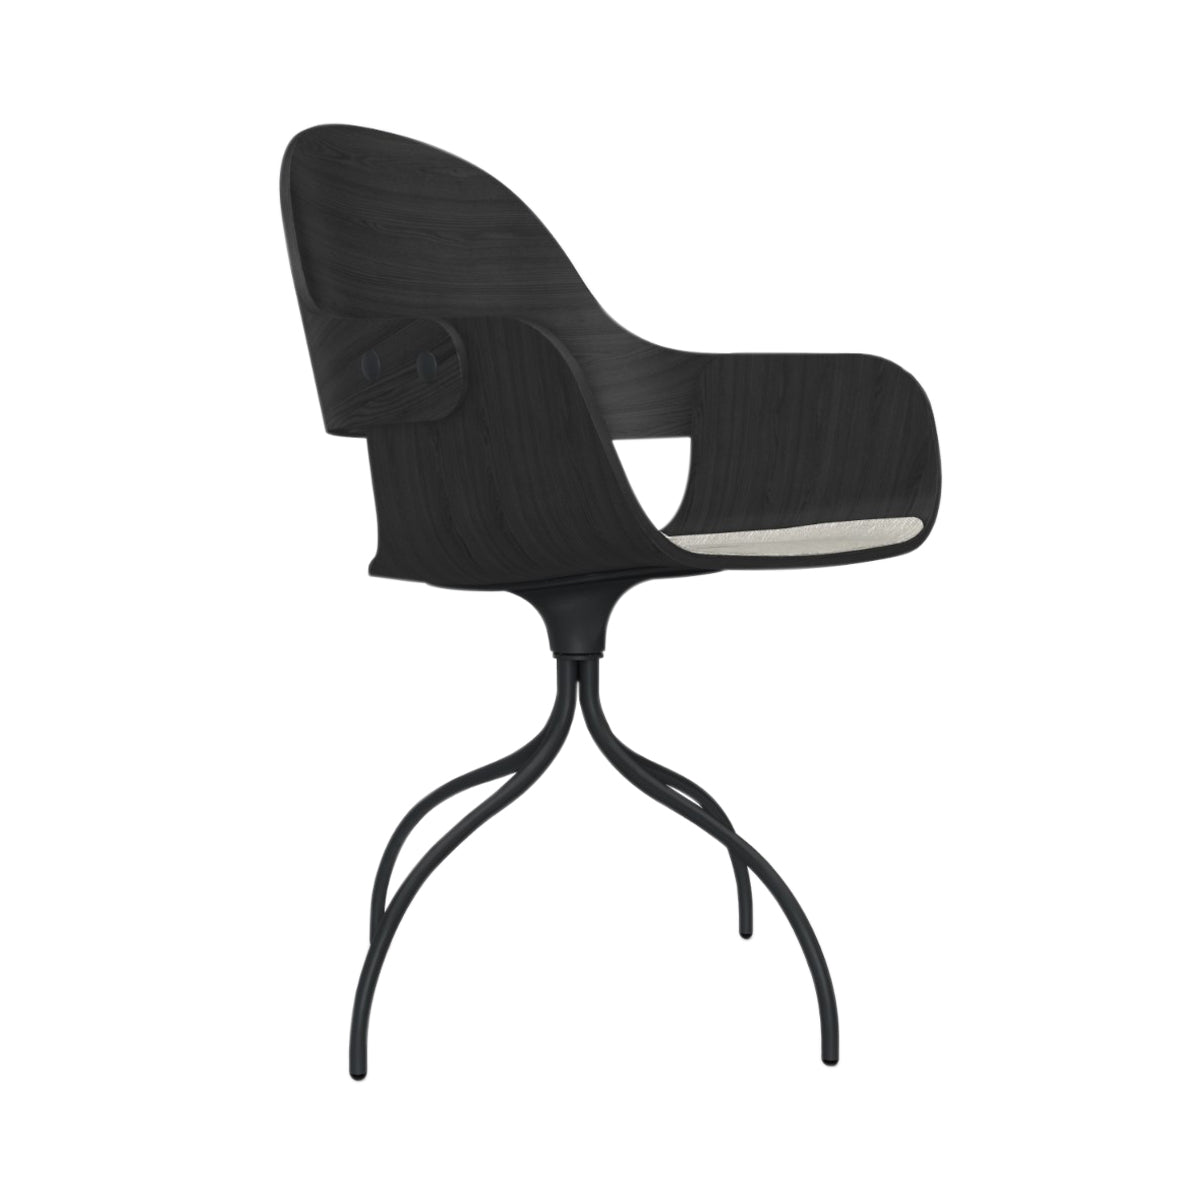 Showtime Nude Chair with Swivel Base: Seat Upholstered + Ash Stained Black + Anthracite Grey